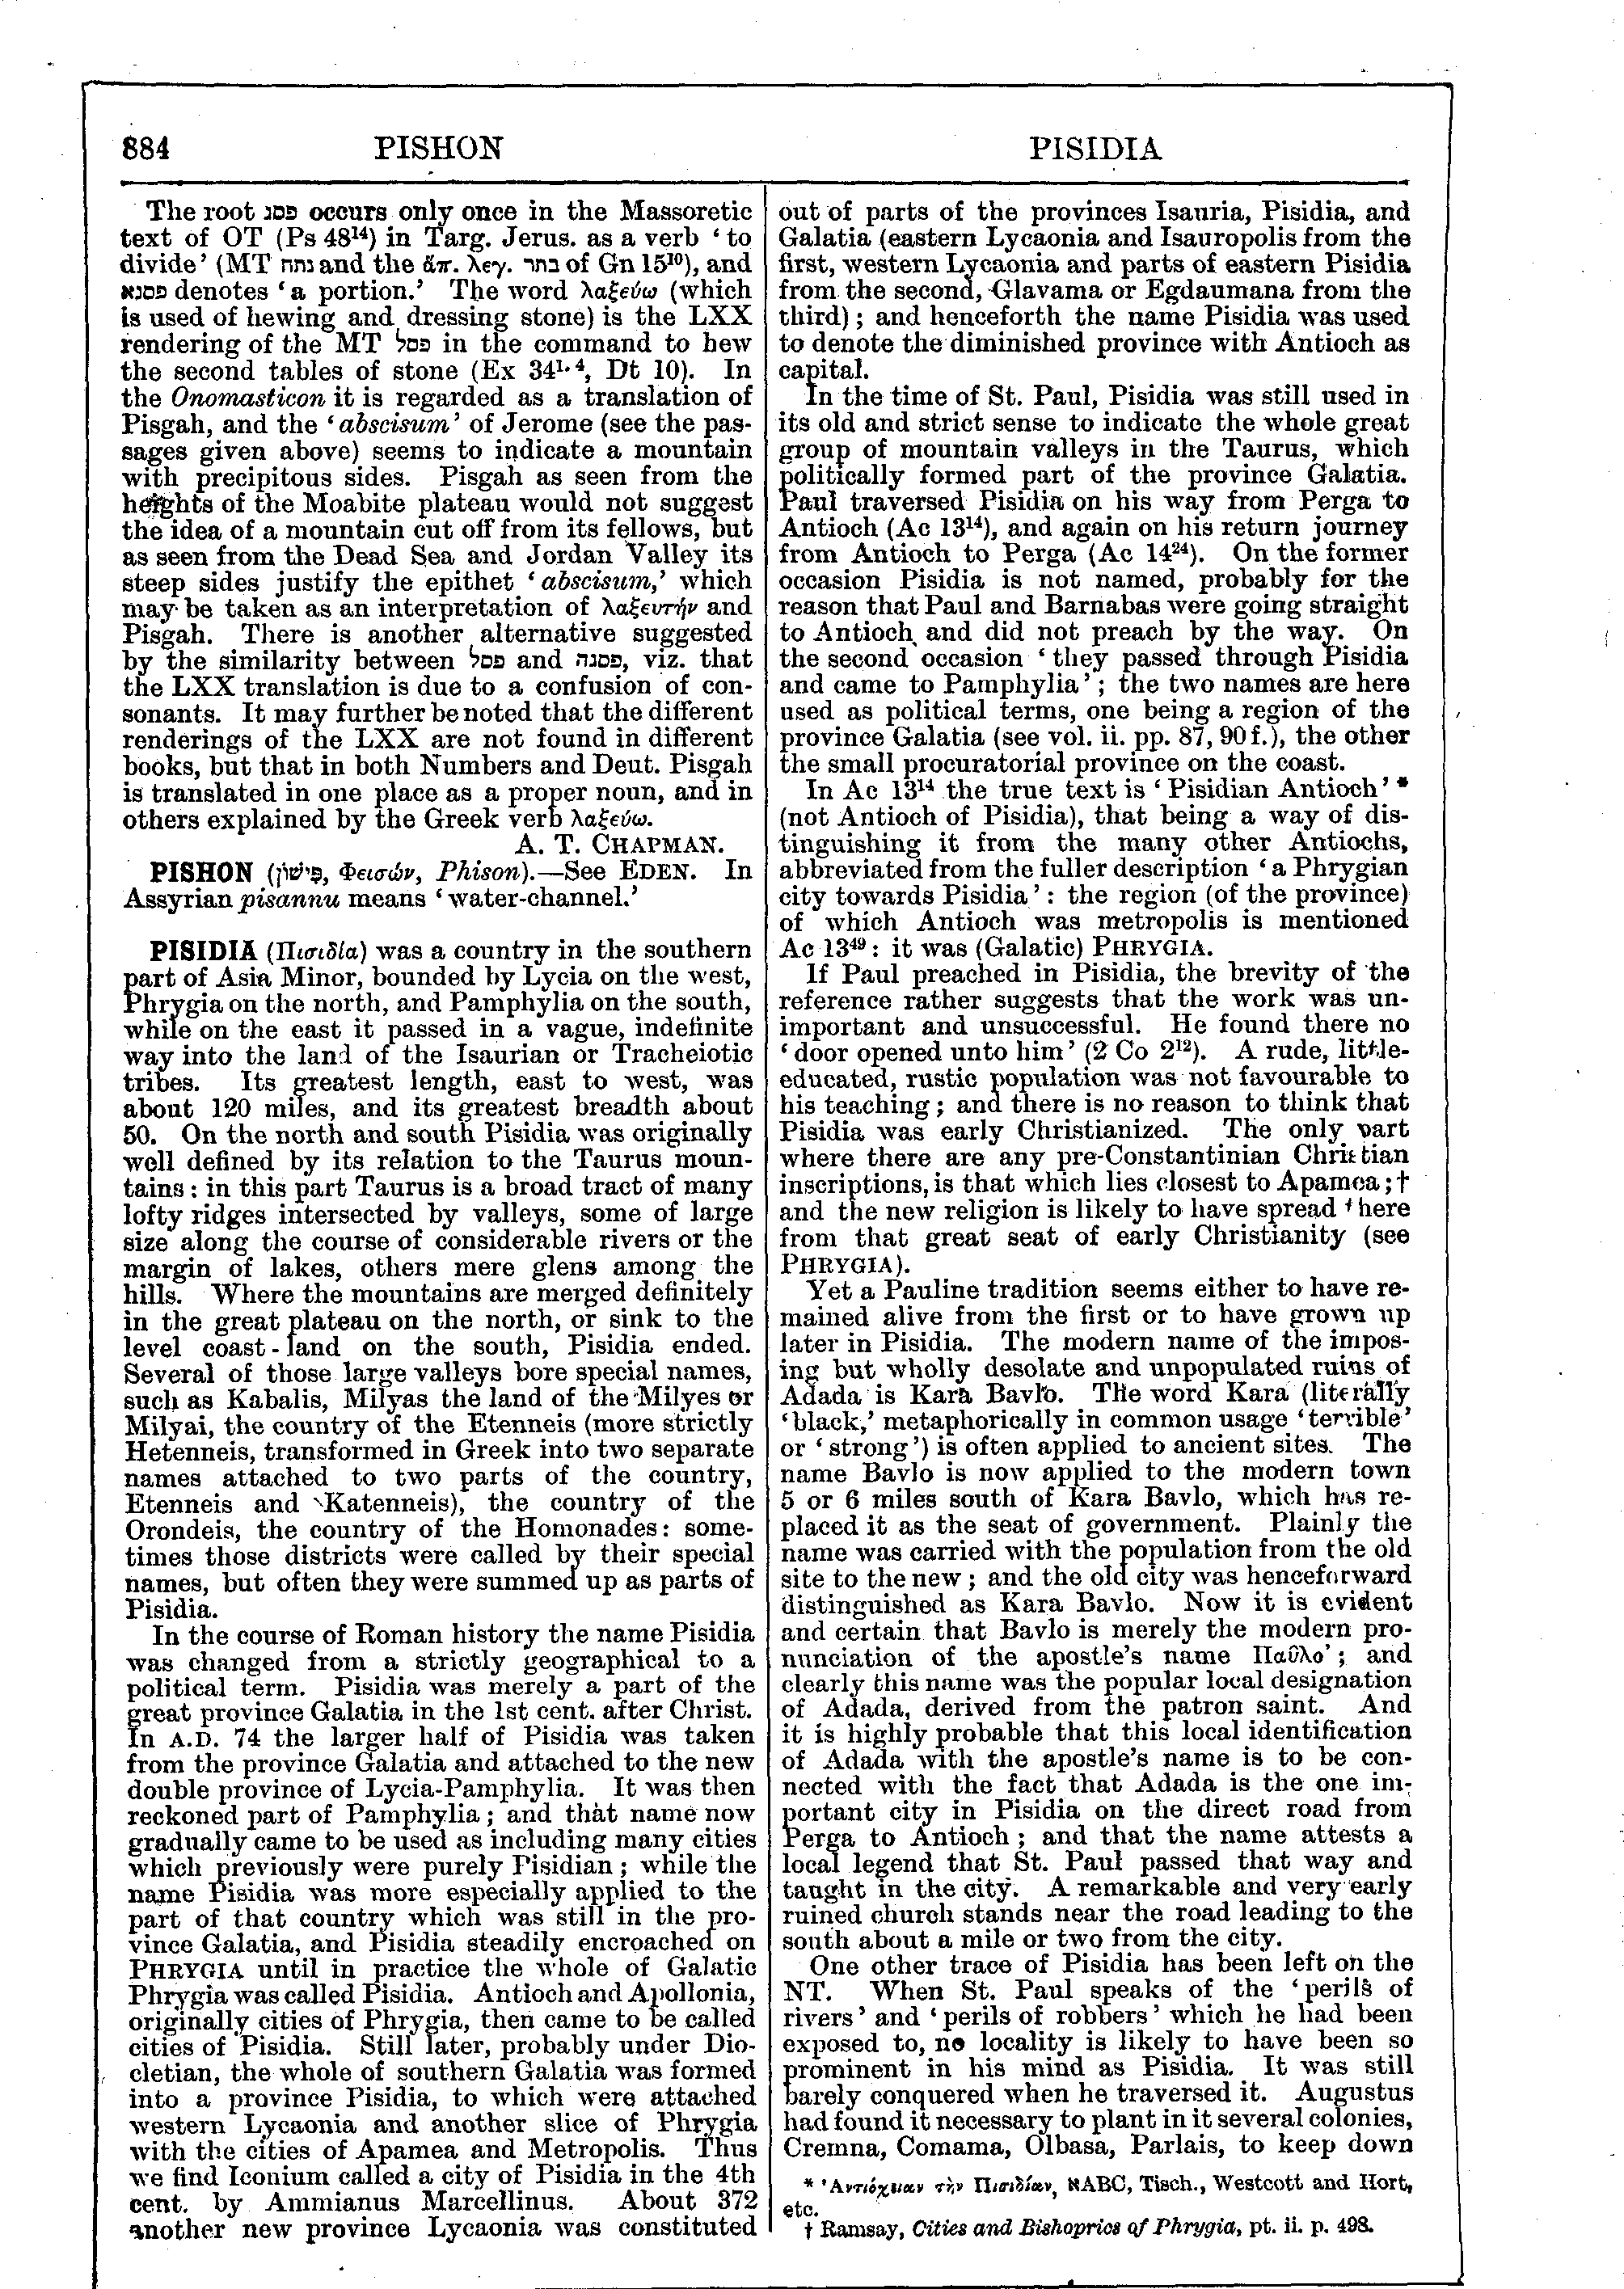 Image of page 884